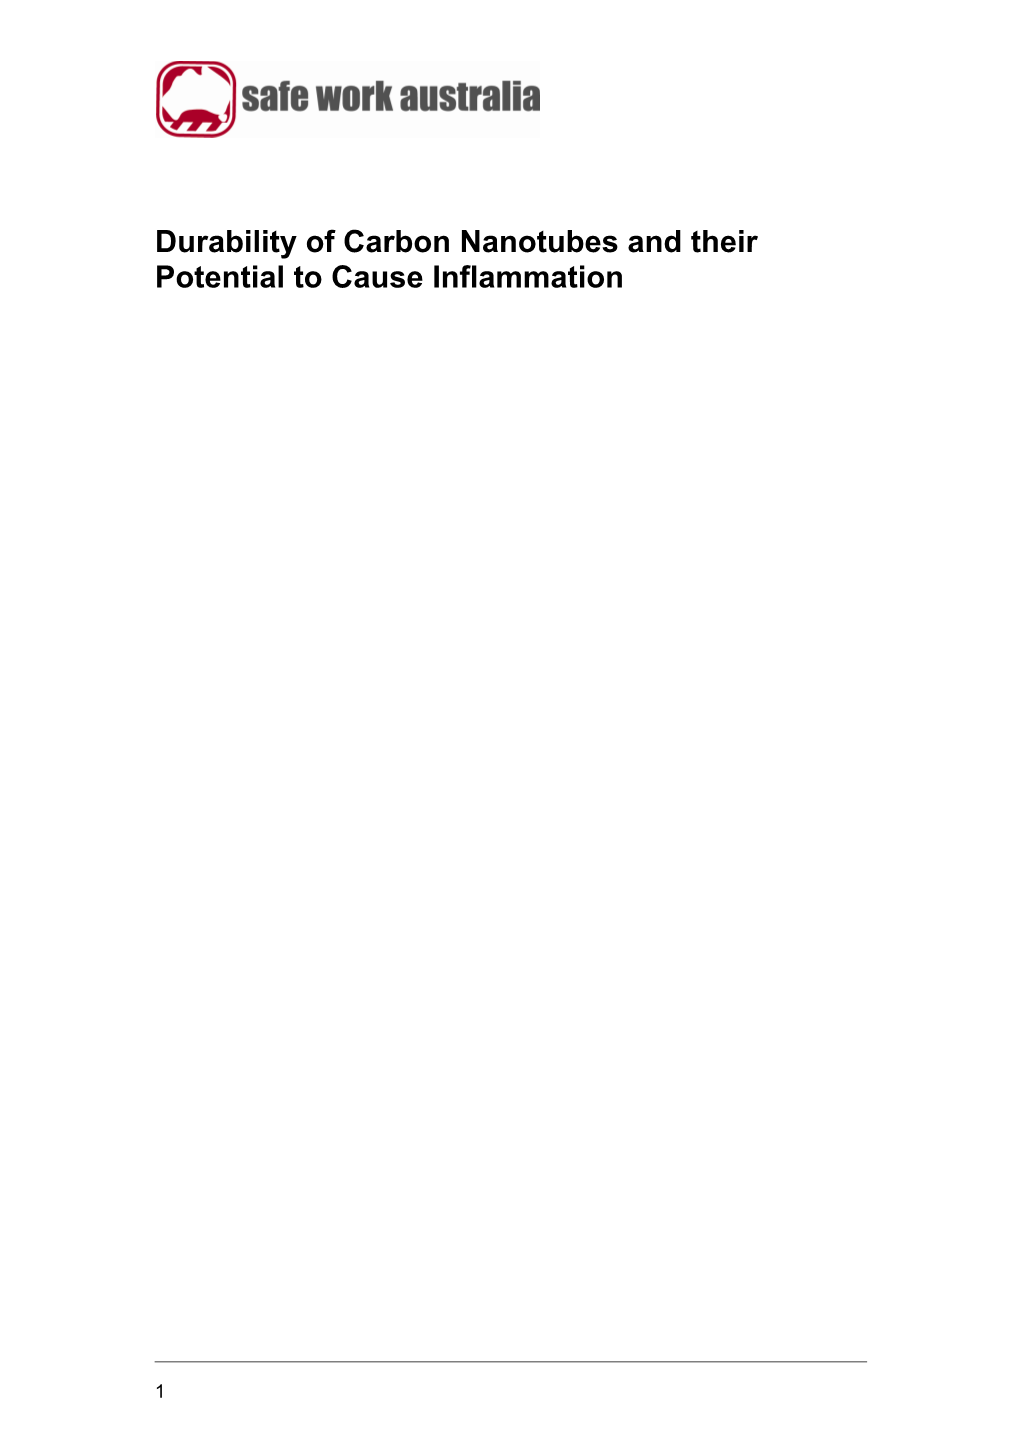 Durability of Carbon Nanotubes and Their Potential to Cause Infammation